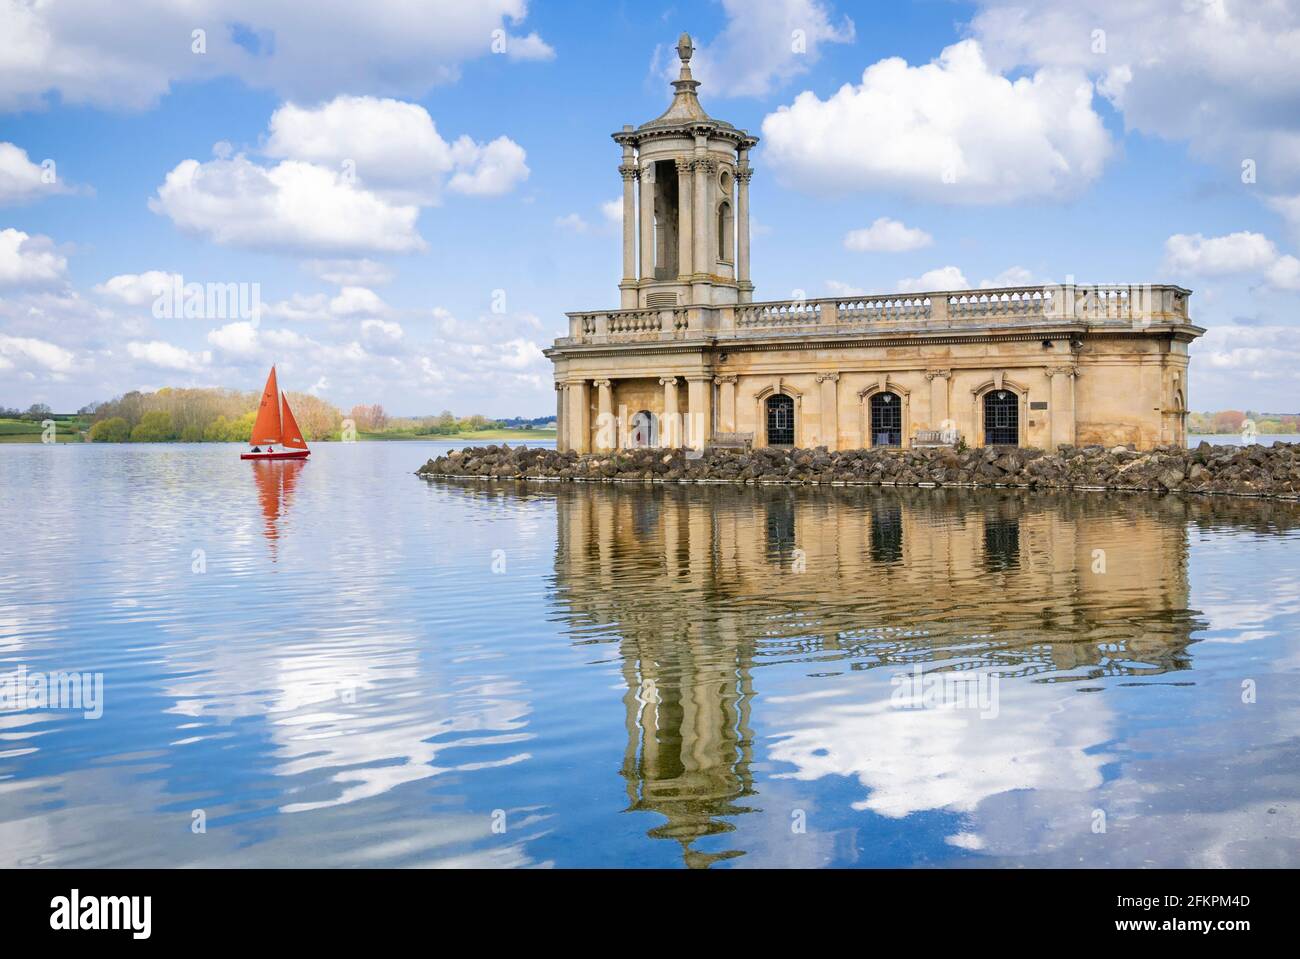 One Sailing boat or One yacht with red sails sailing past Normanton Church Rutland water reservoir Oakham Rutland England UK GB Europe Stock Photo